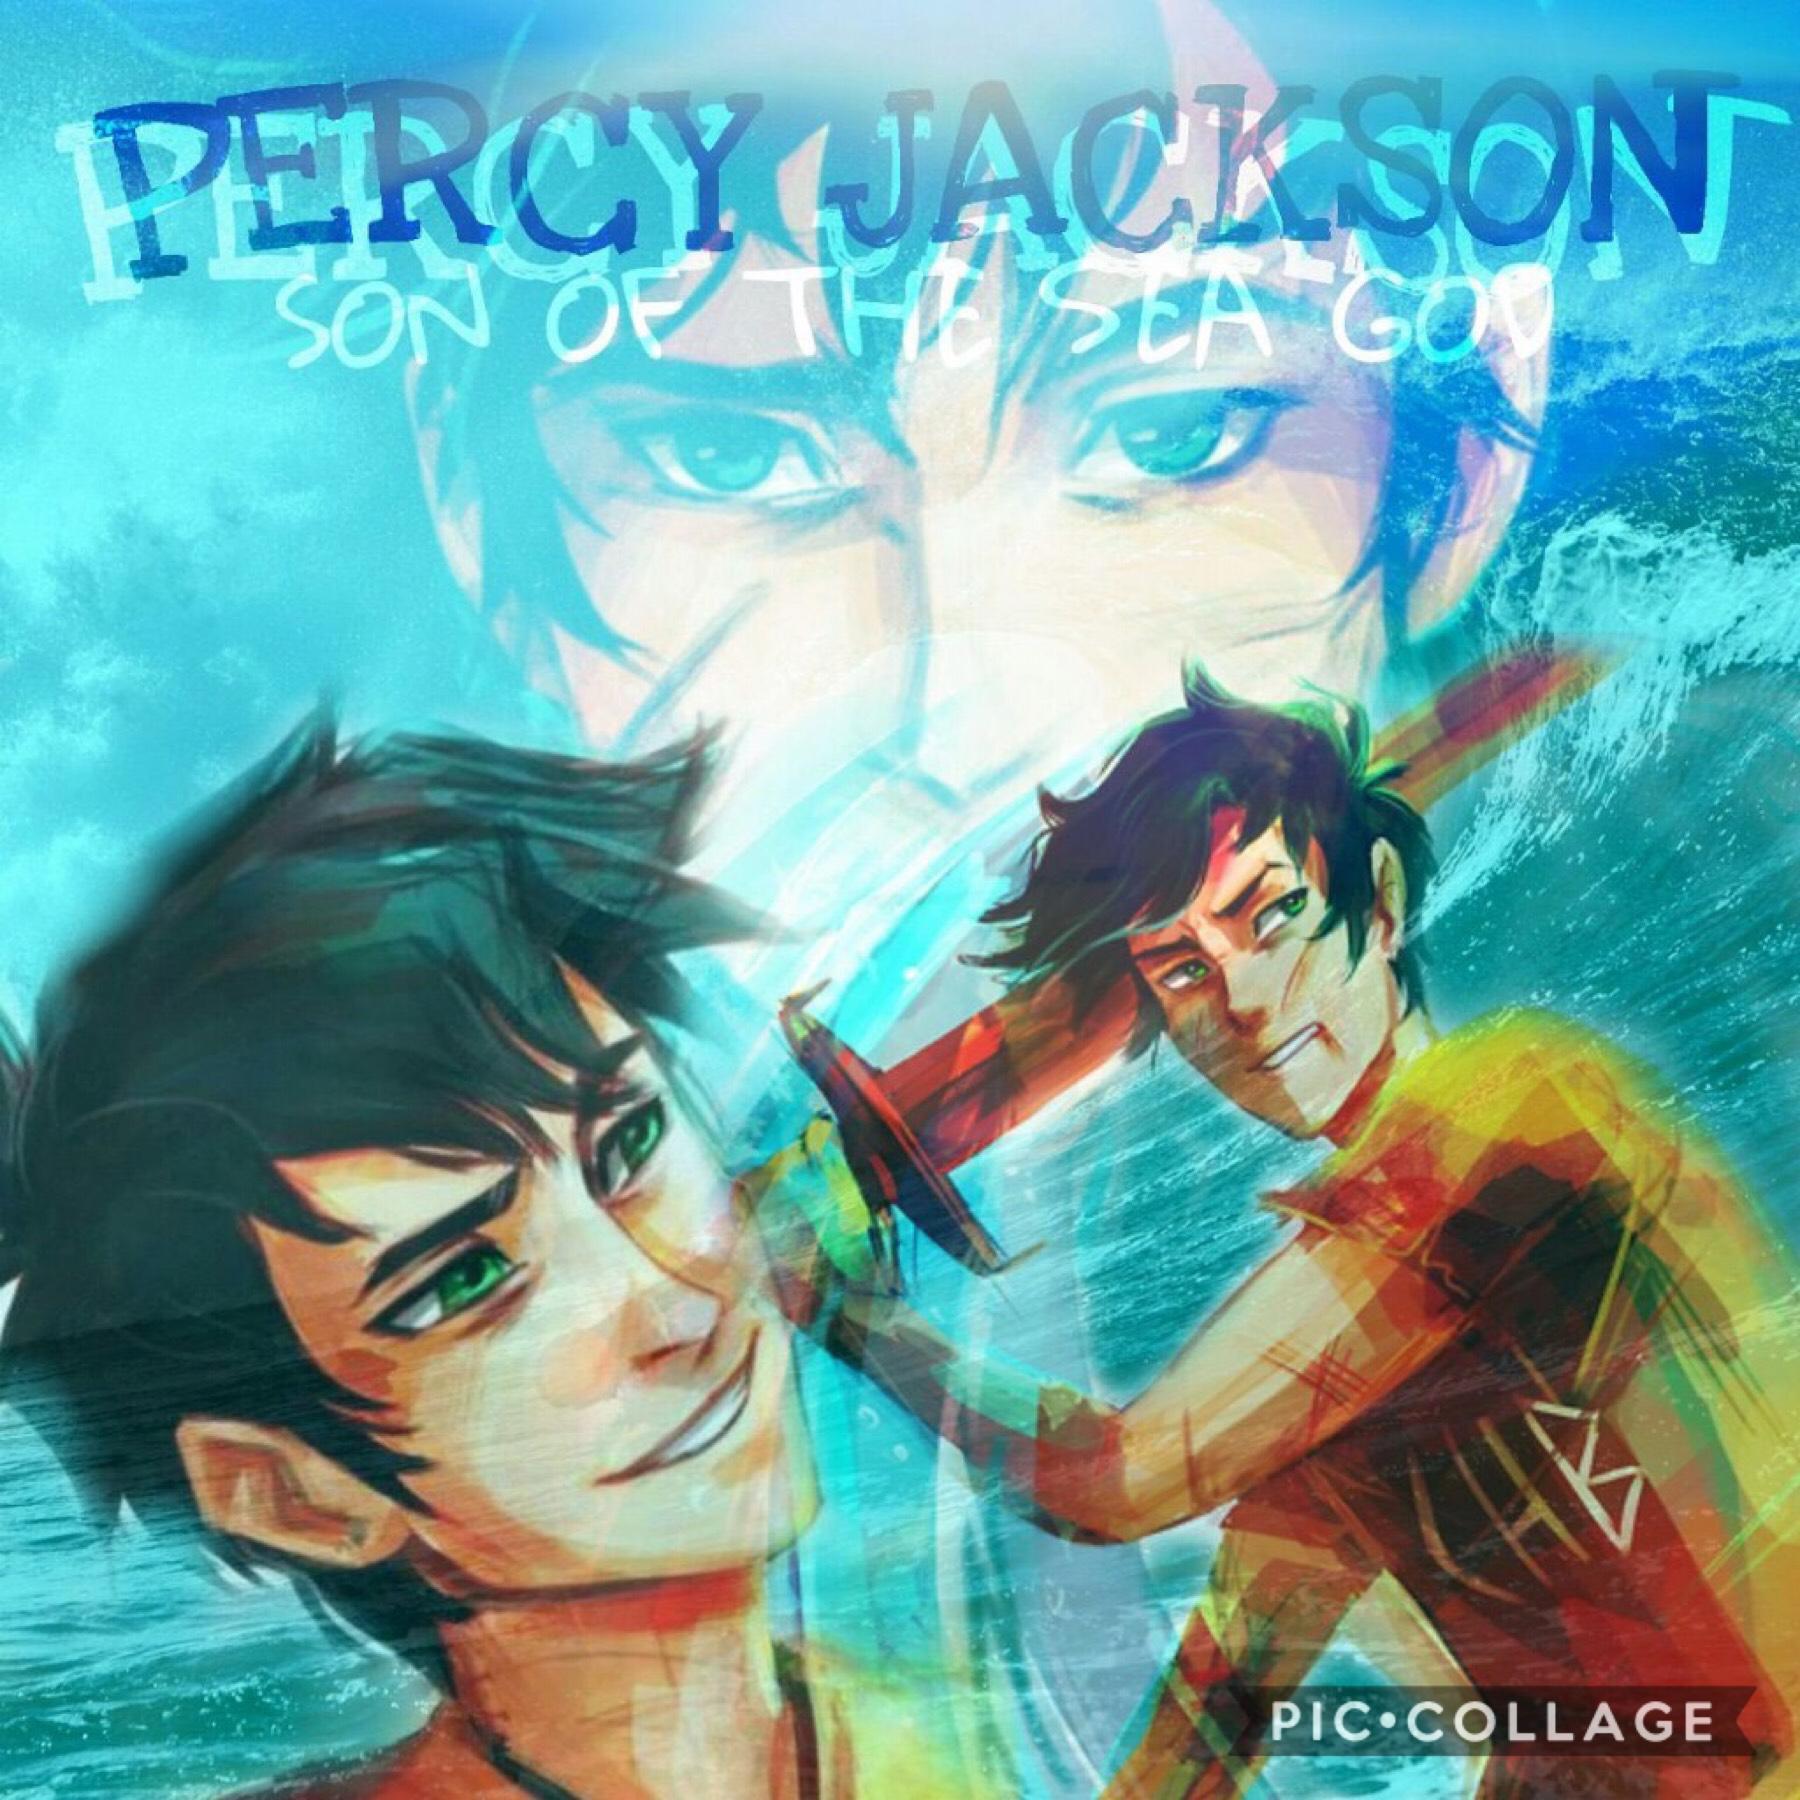 Tap the wizards >>> 🧙🏻‍♂️🧙🏻‍♀️
Hey everyone! I’m absolutely loving Percy Jackson, I just started it! 😍 I thought this looked super cool! 😆